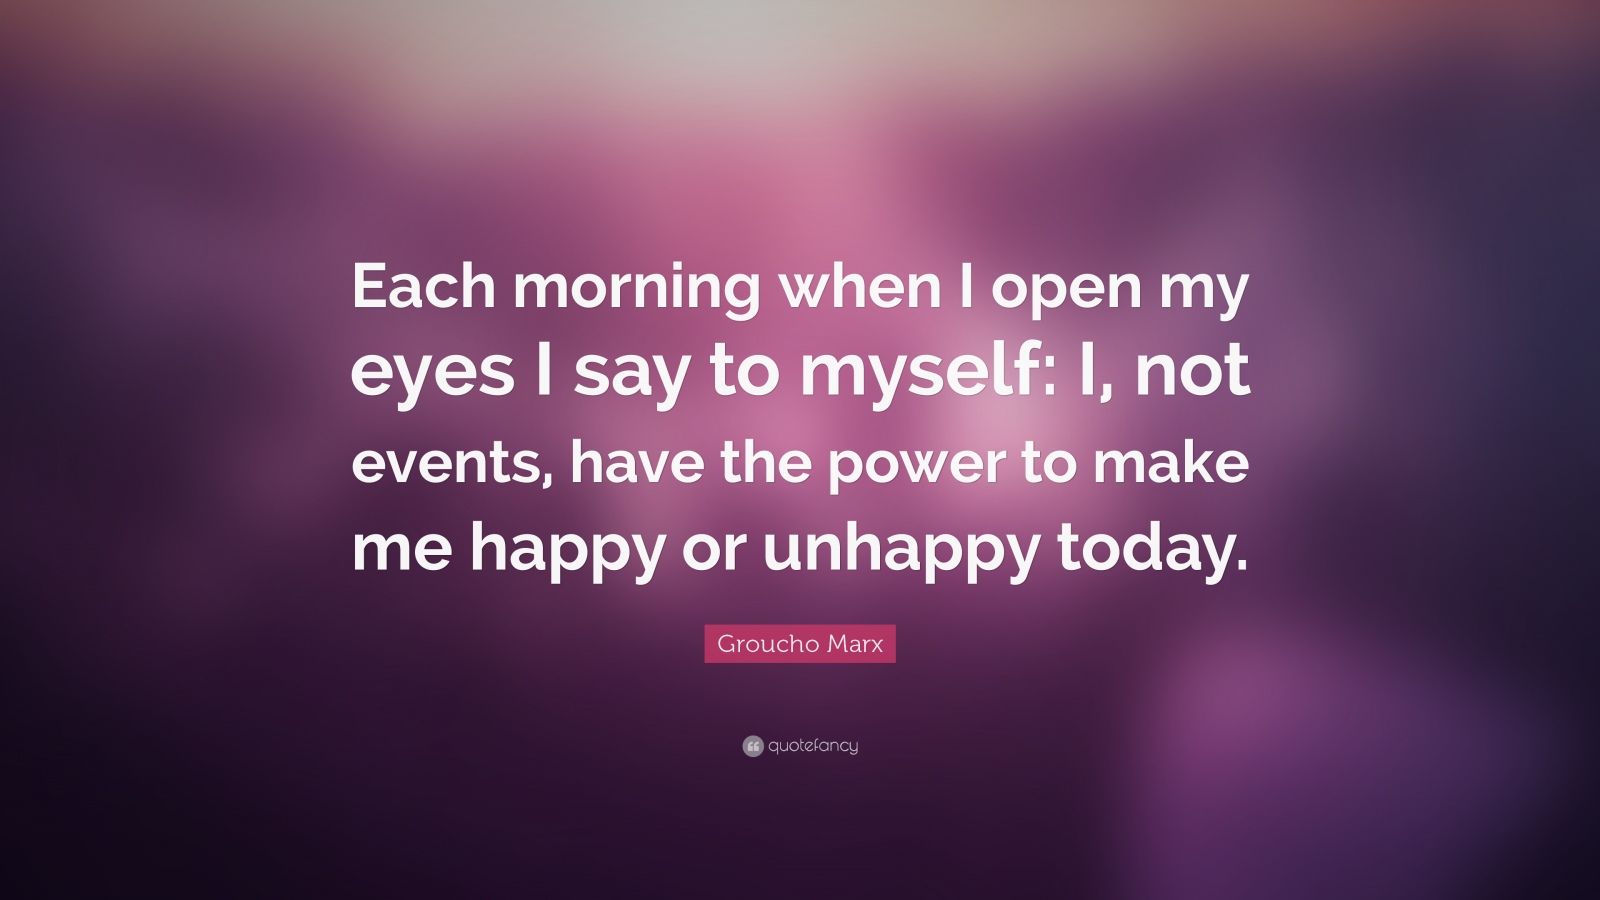 44164 Groucho Marx Quote Each morning when I open my eyes I say to